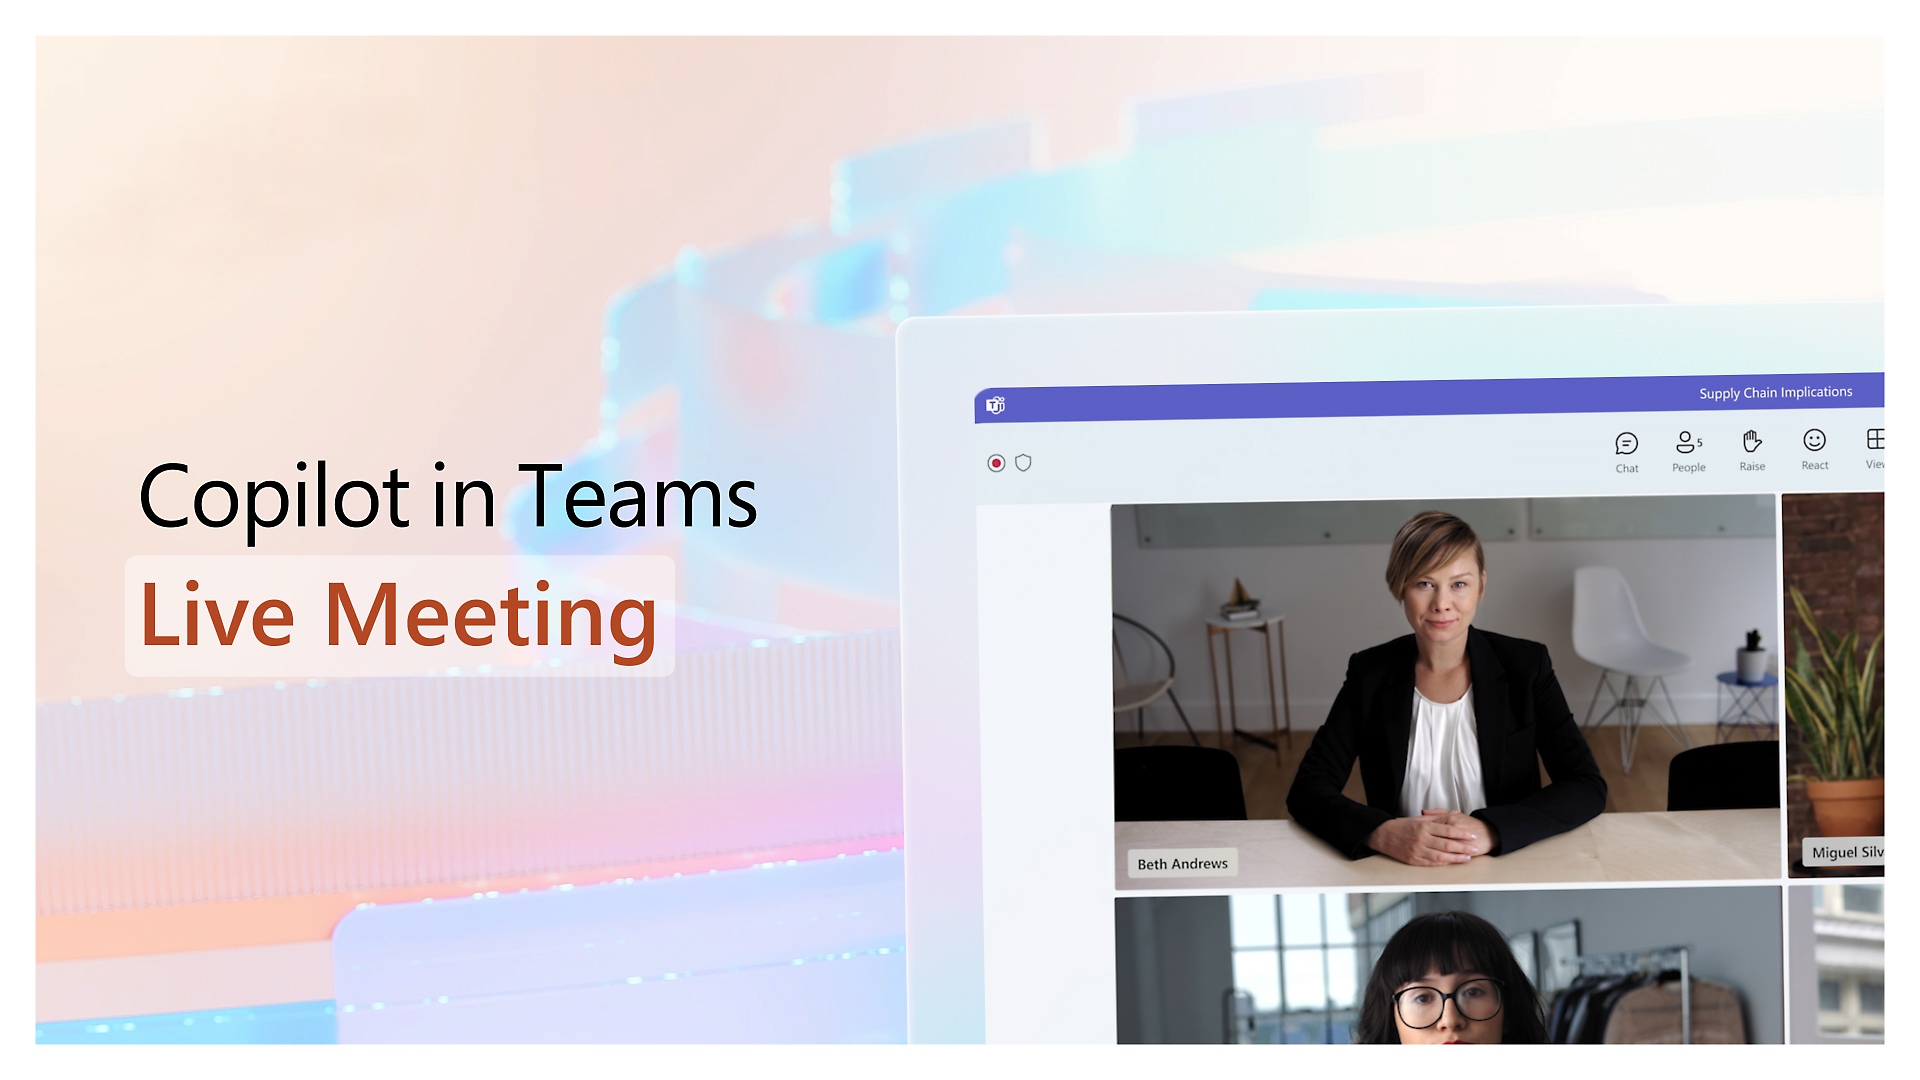 An image of Copilot in Teams - Live Meeting 